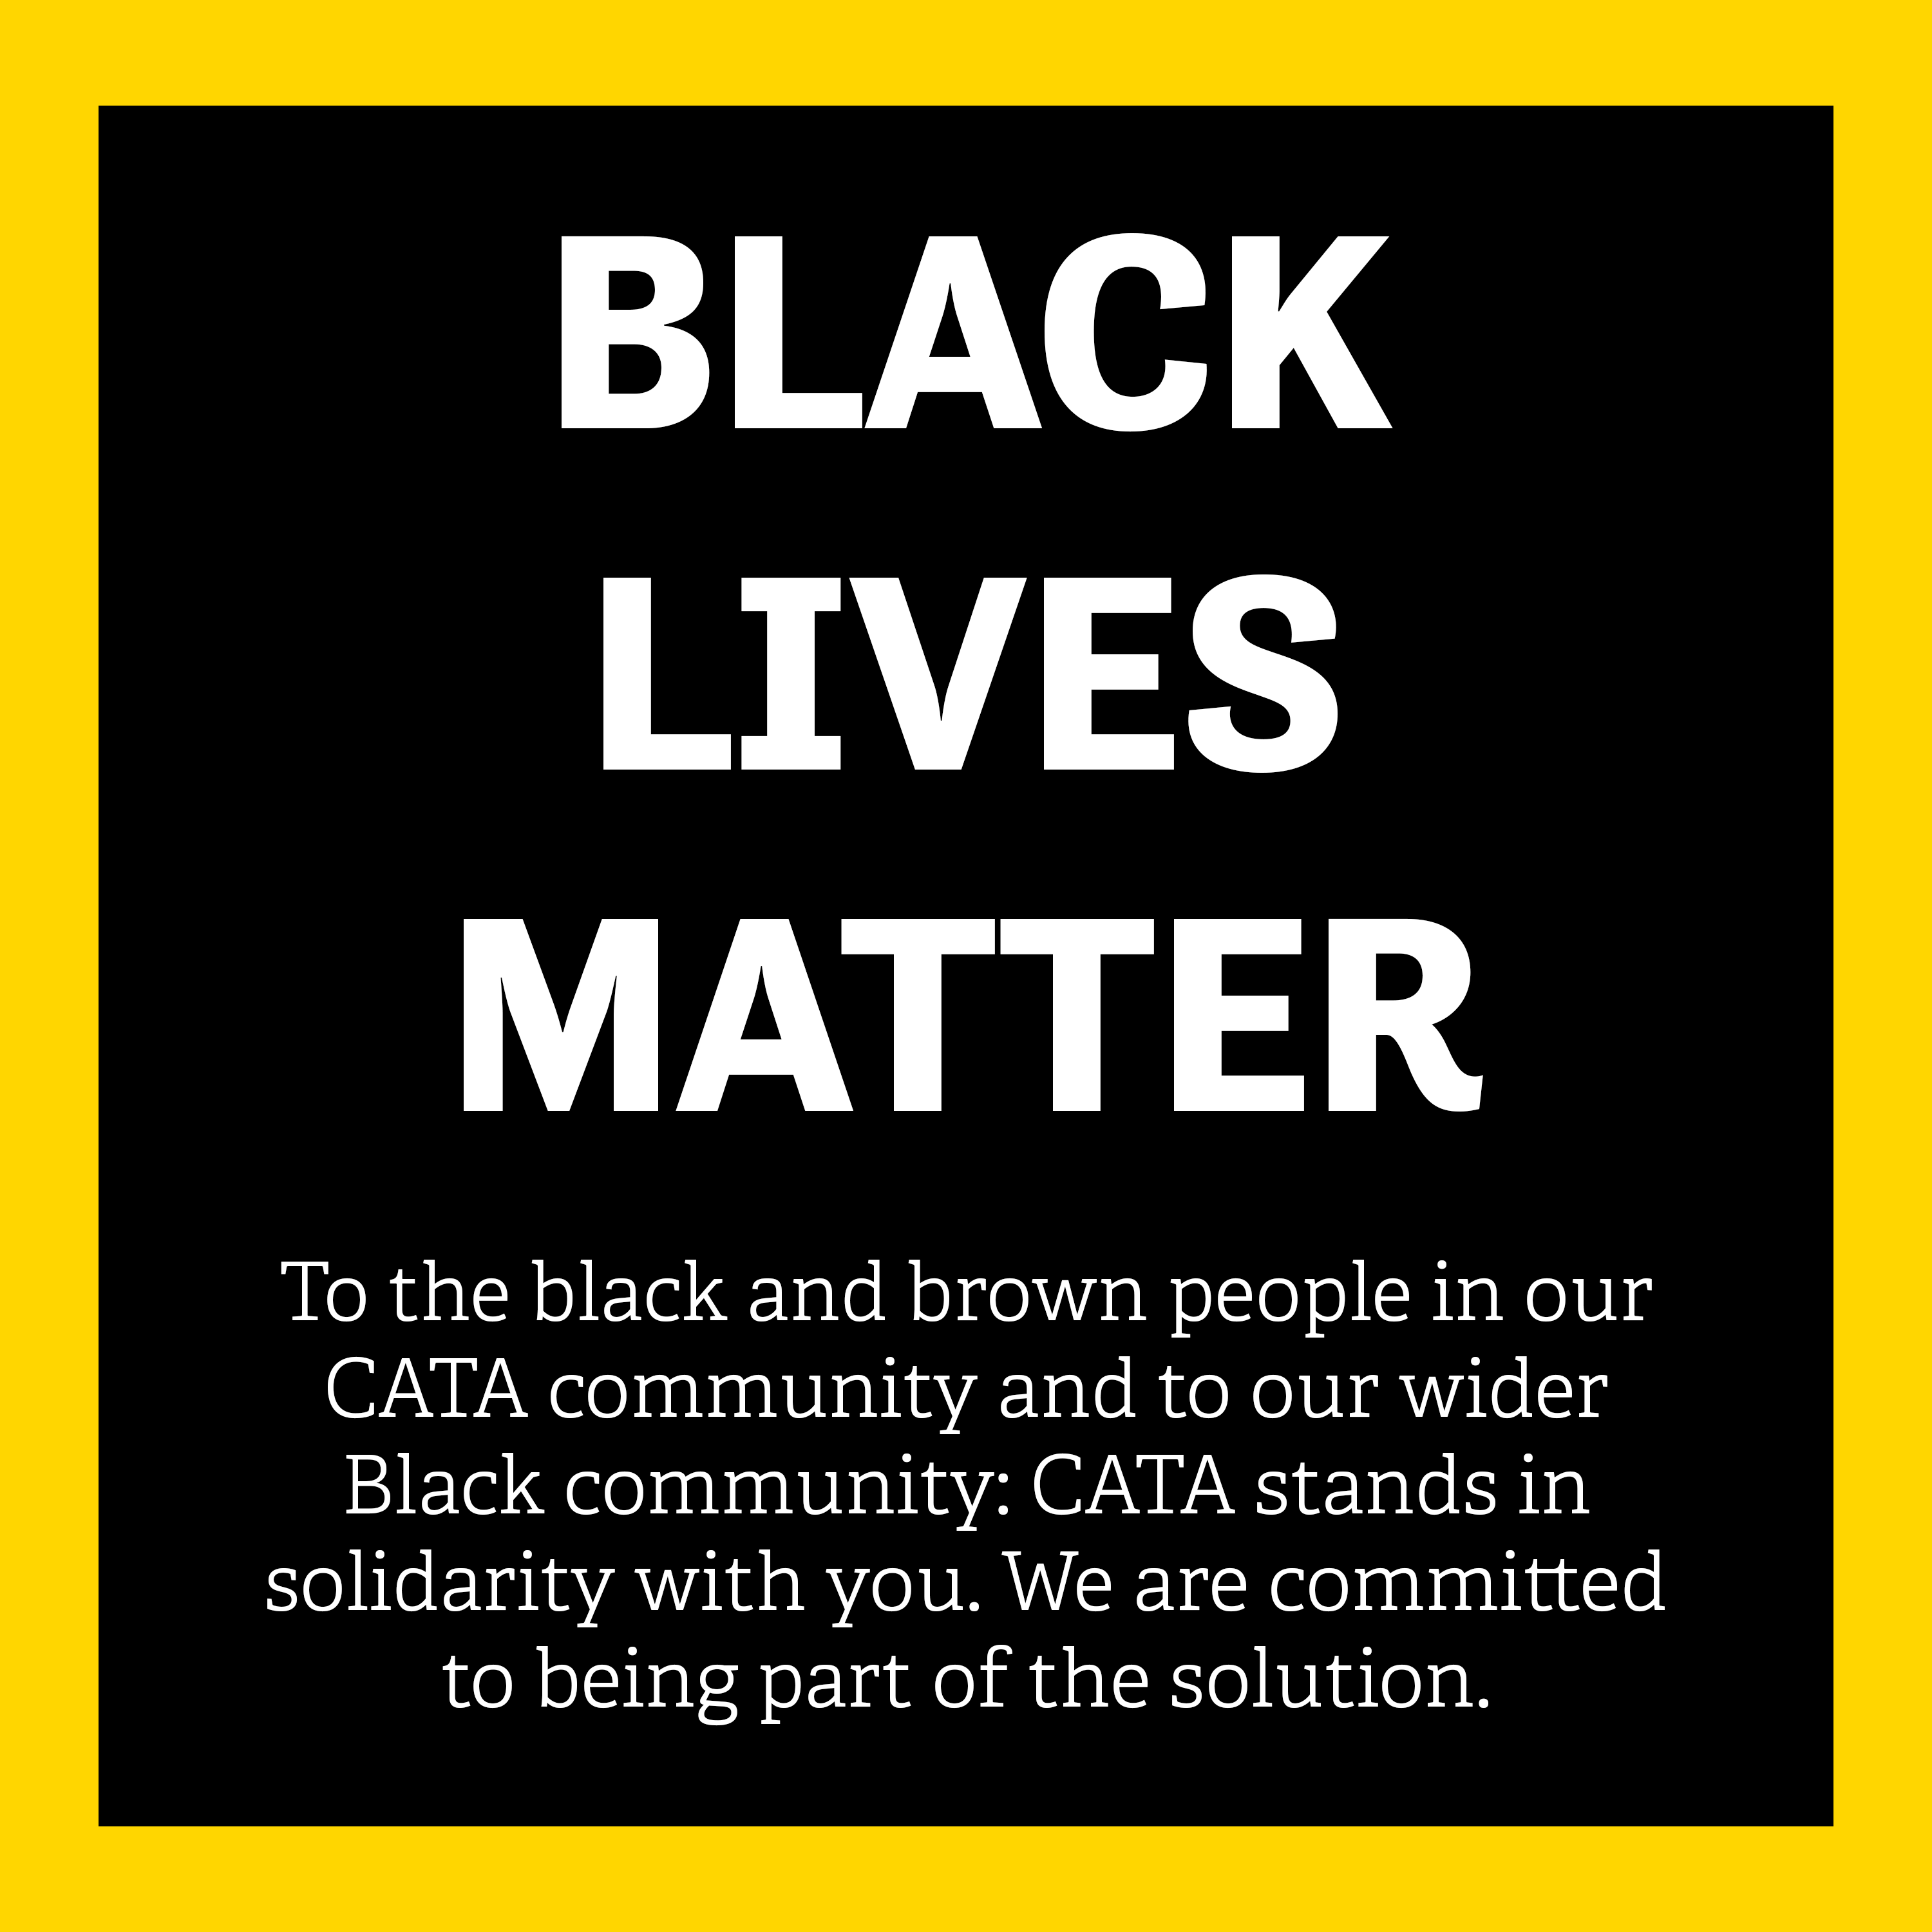 Text image: BLACK LIVES MATTER. To the black and brown people in our CATA community and to our wider Black community: CATA stands in solidarity with you. We are committed to being part of the solution.